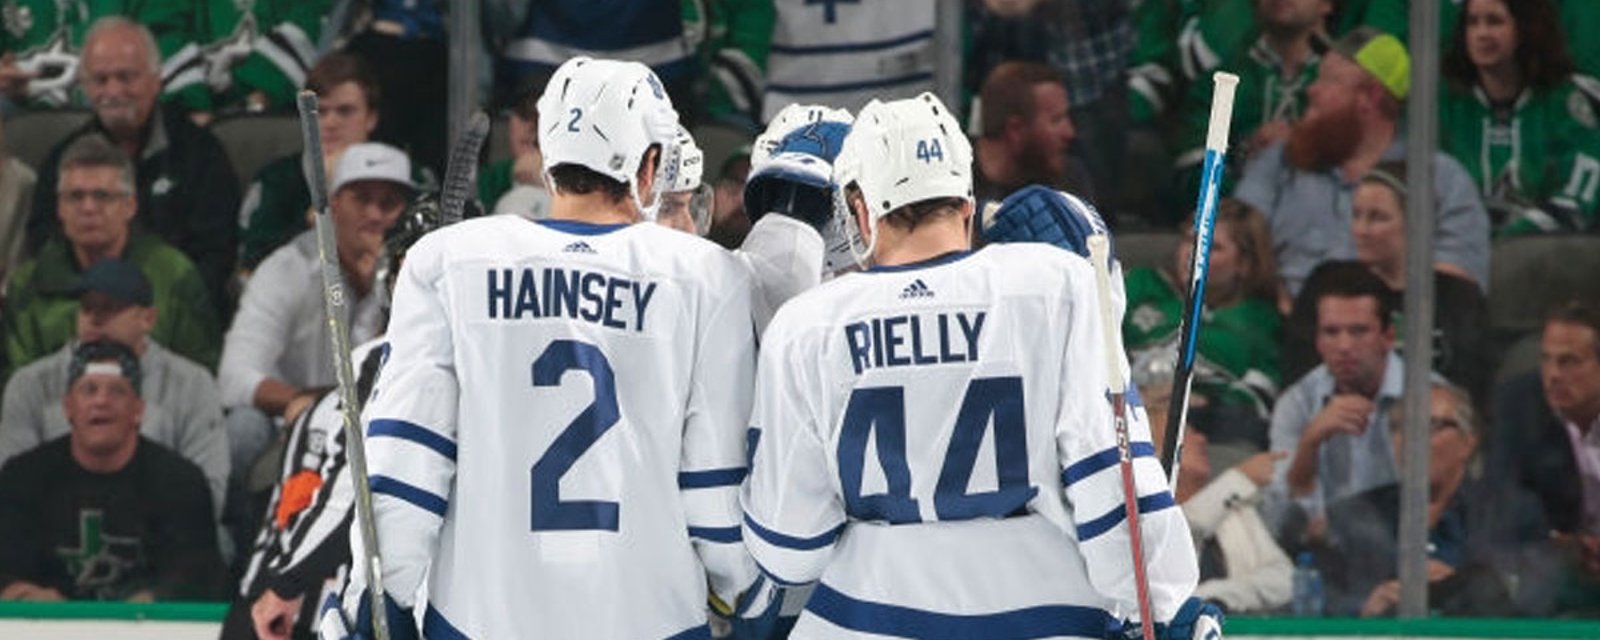 Hainsey made “inappropriate” video to get Rielly into the All-Star Game! 